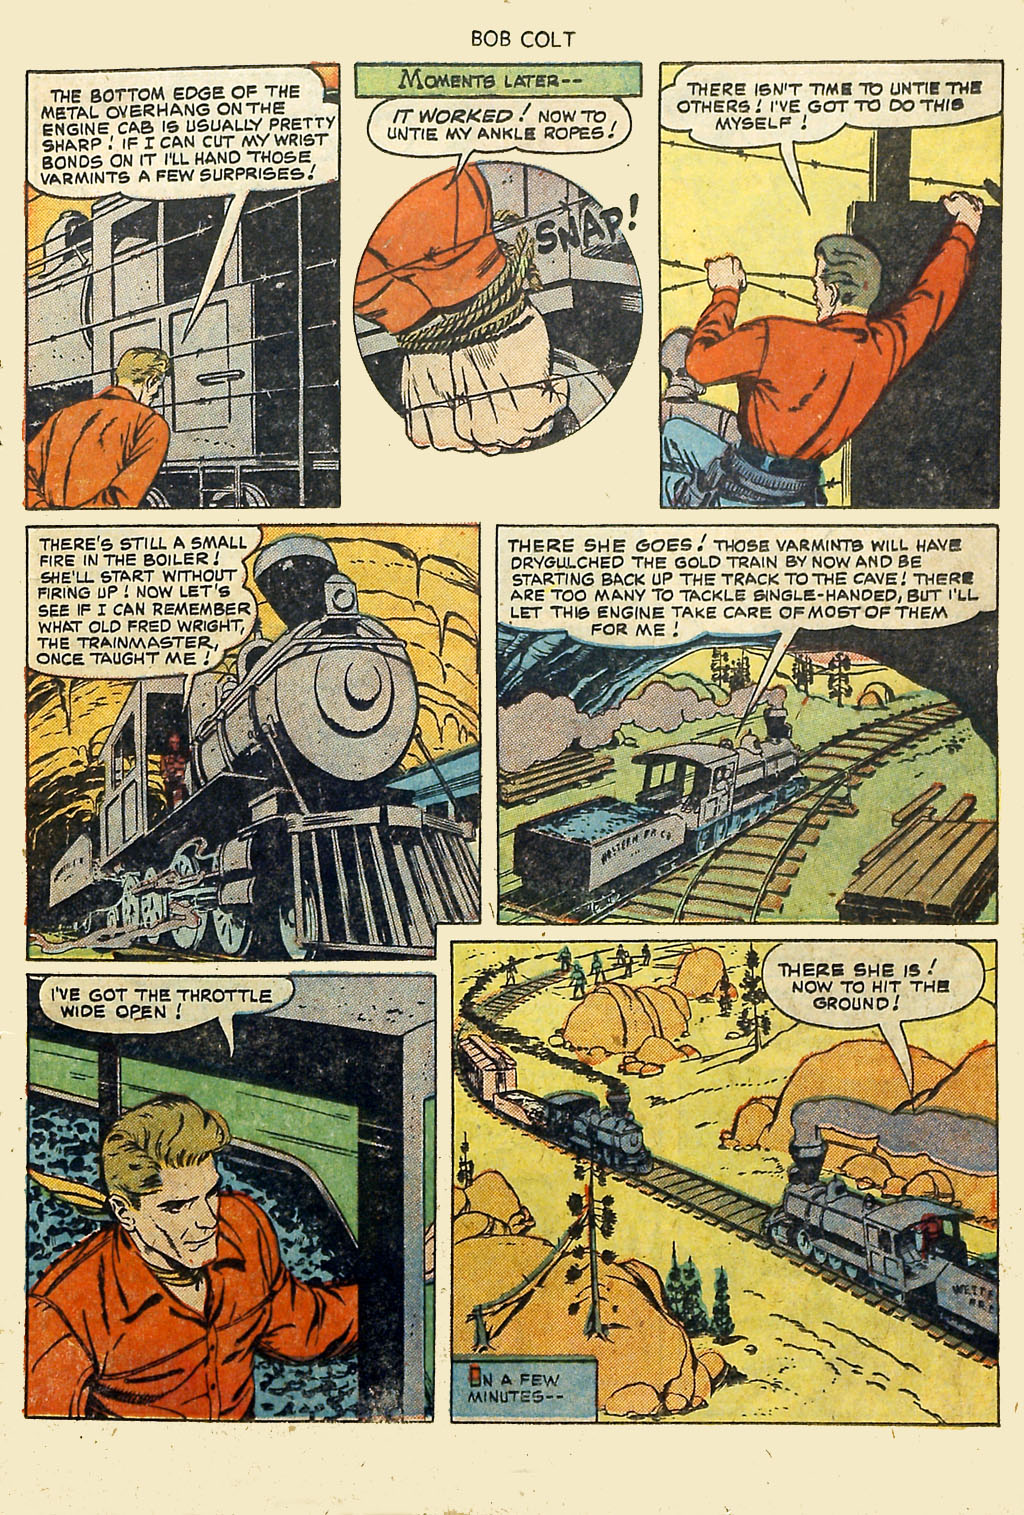 Read online Bob Colt Western comic -  Issue #2 - 11